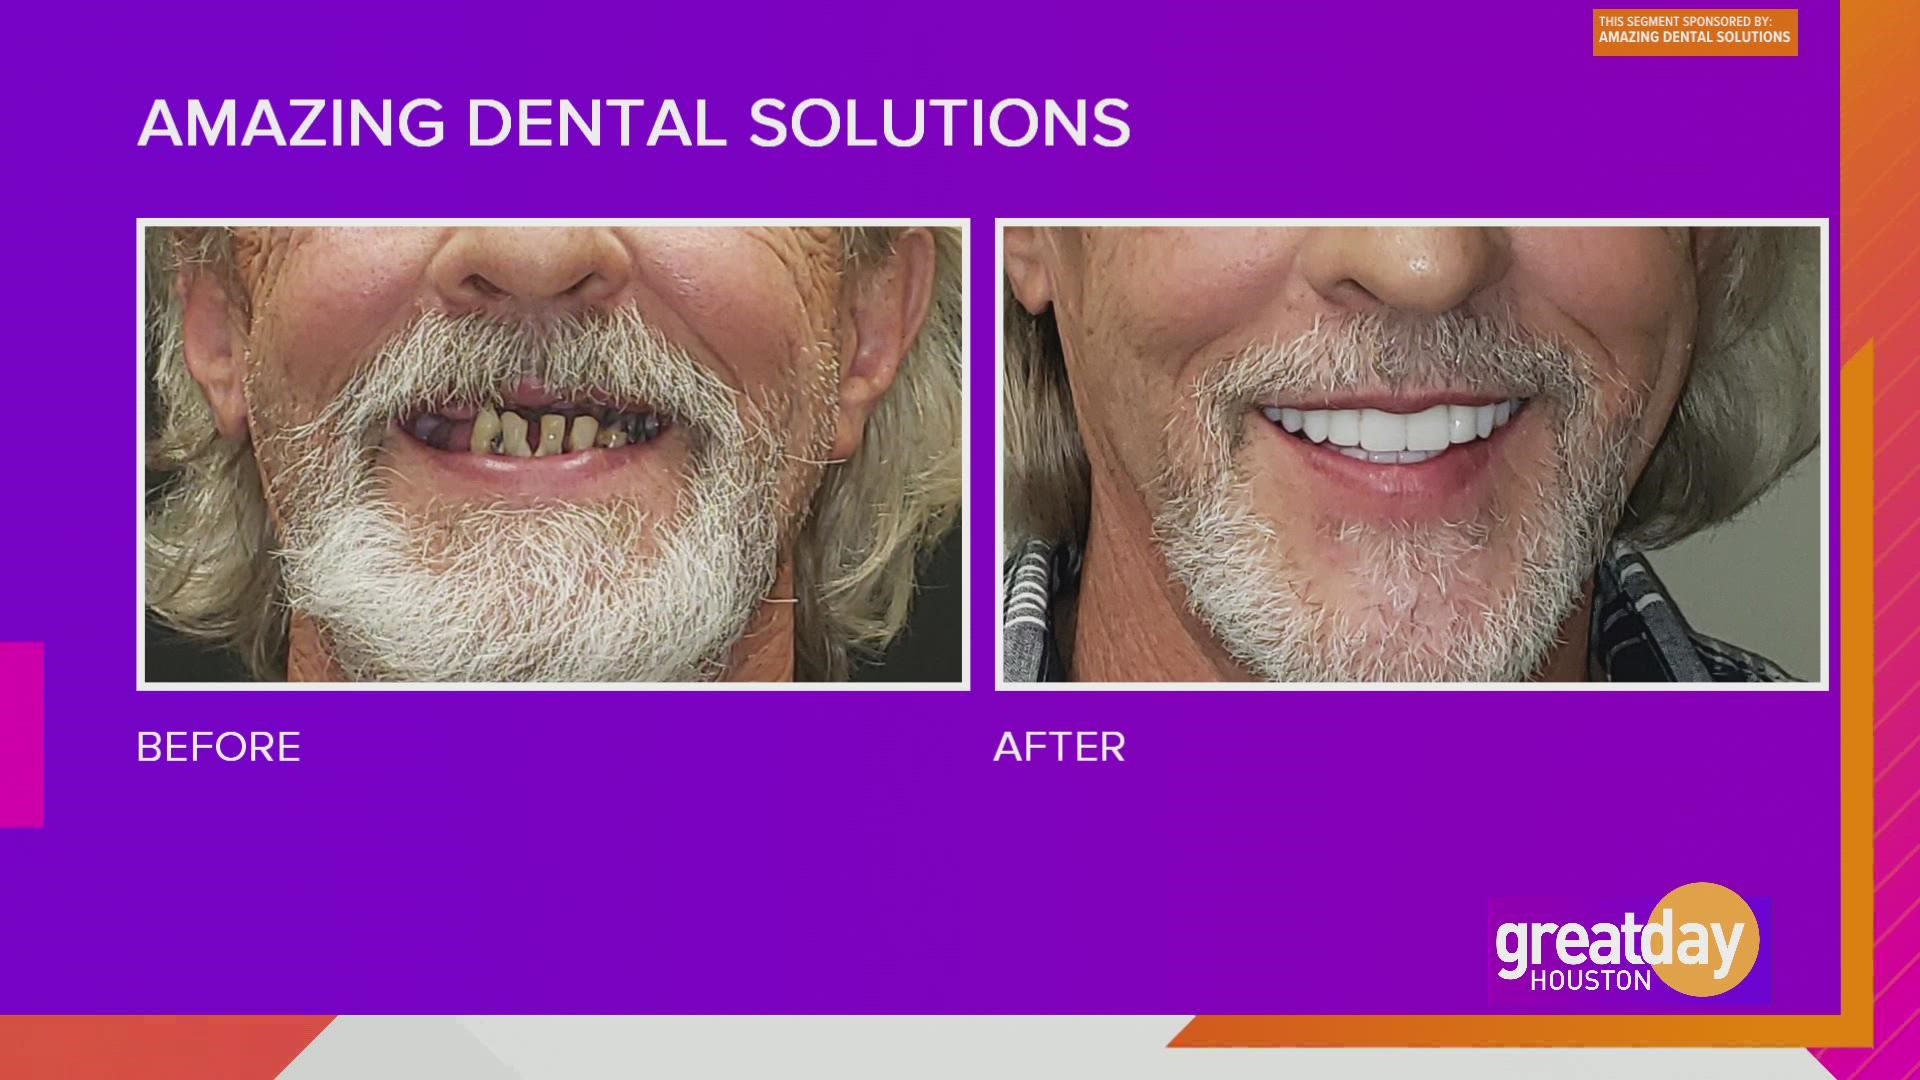 Dr. James Amaning can restore your smile with dental implants